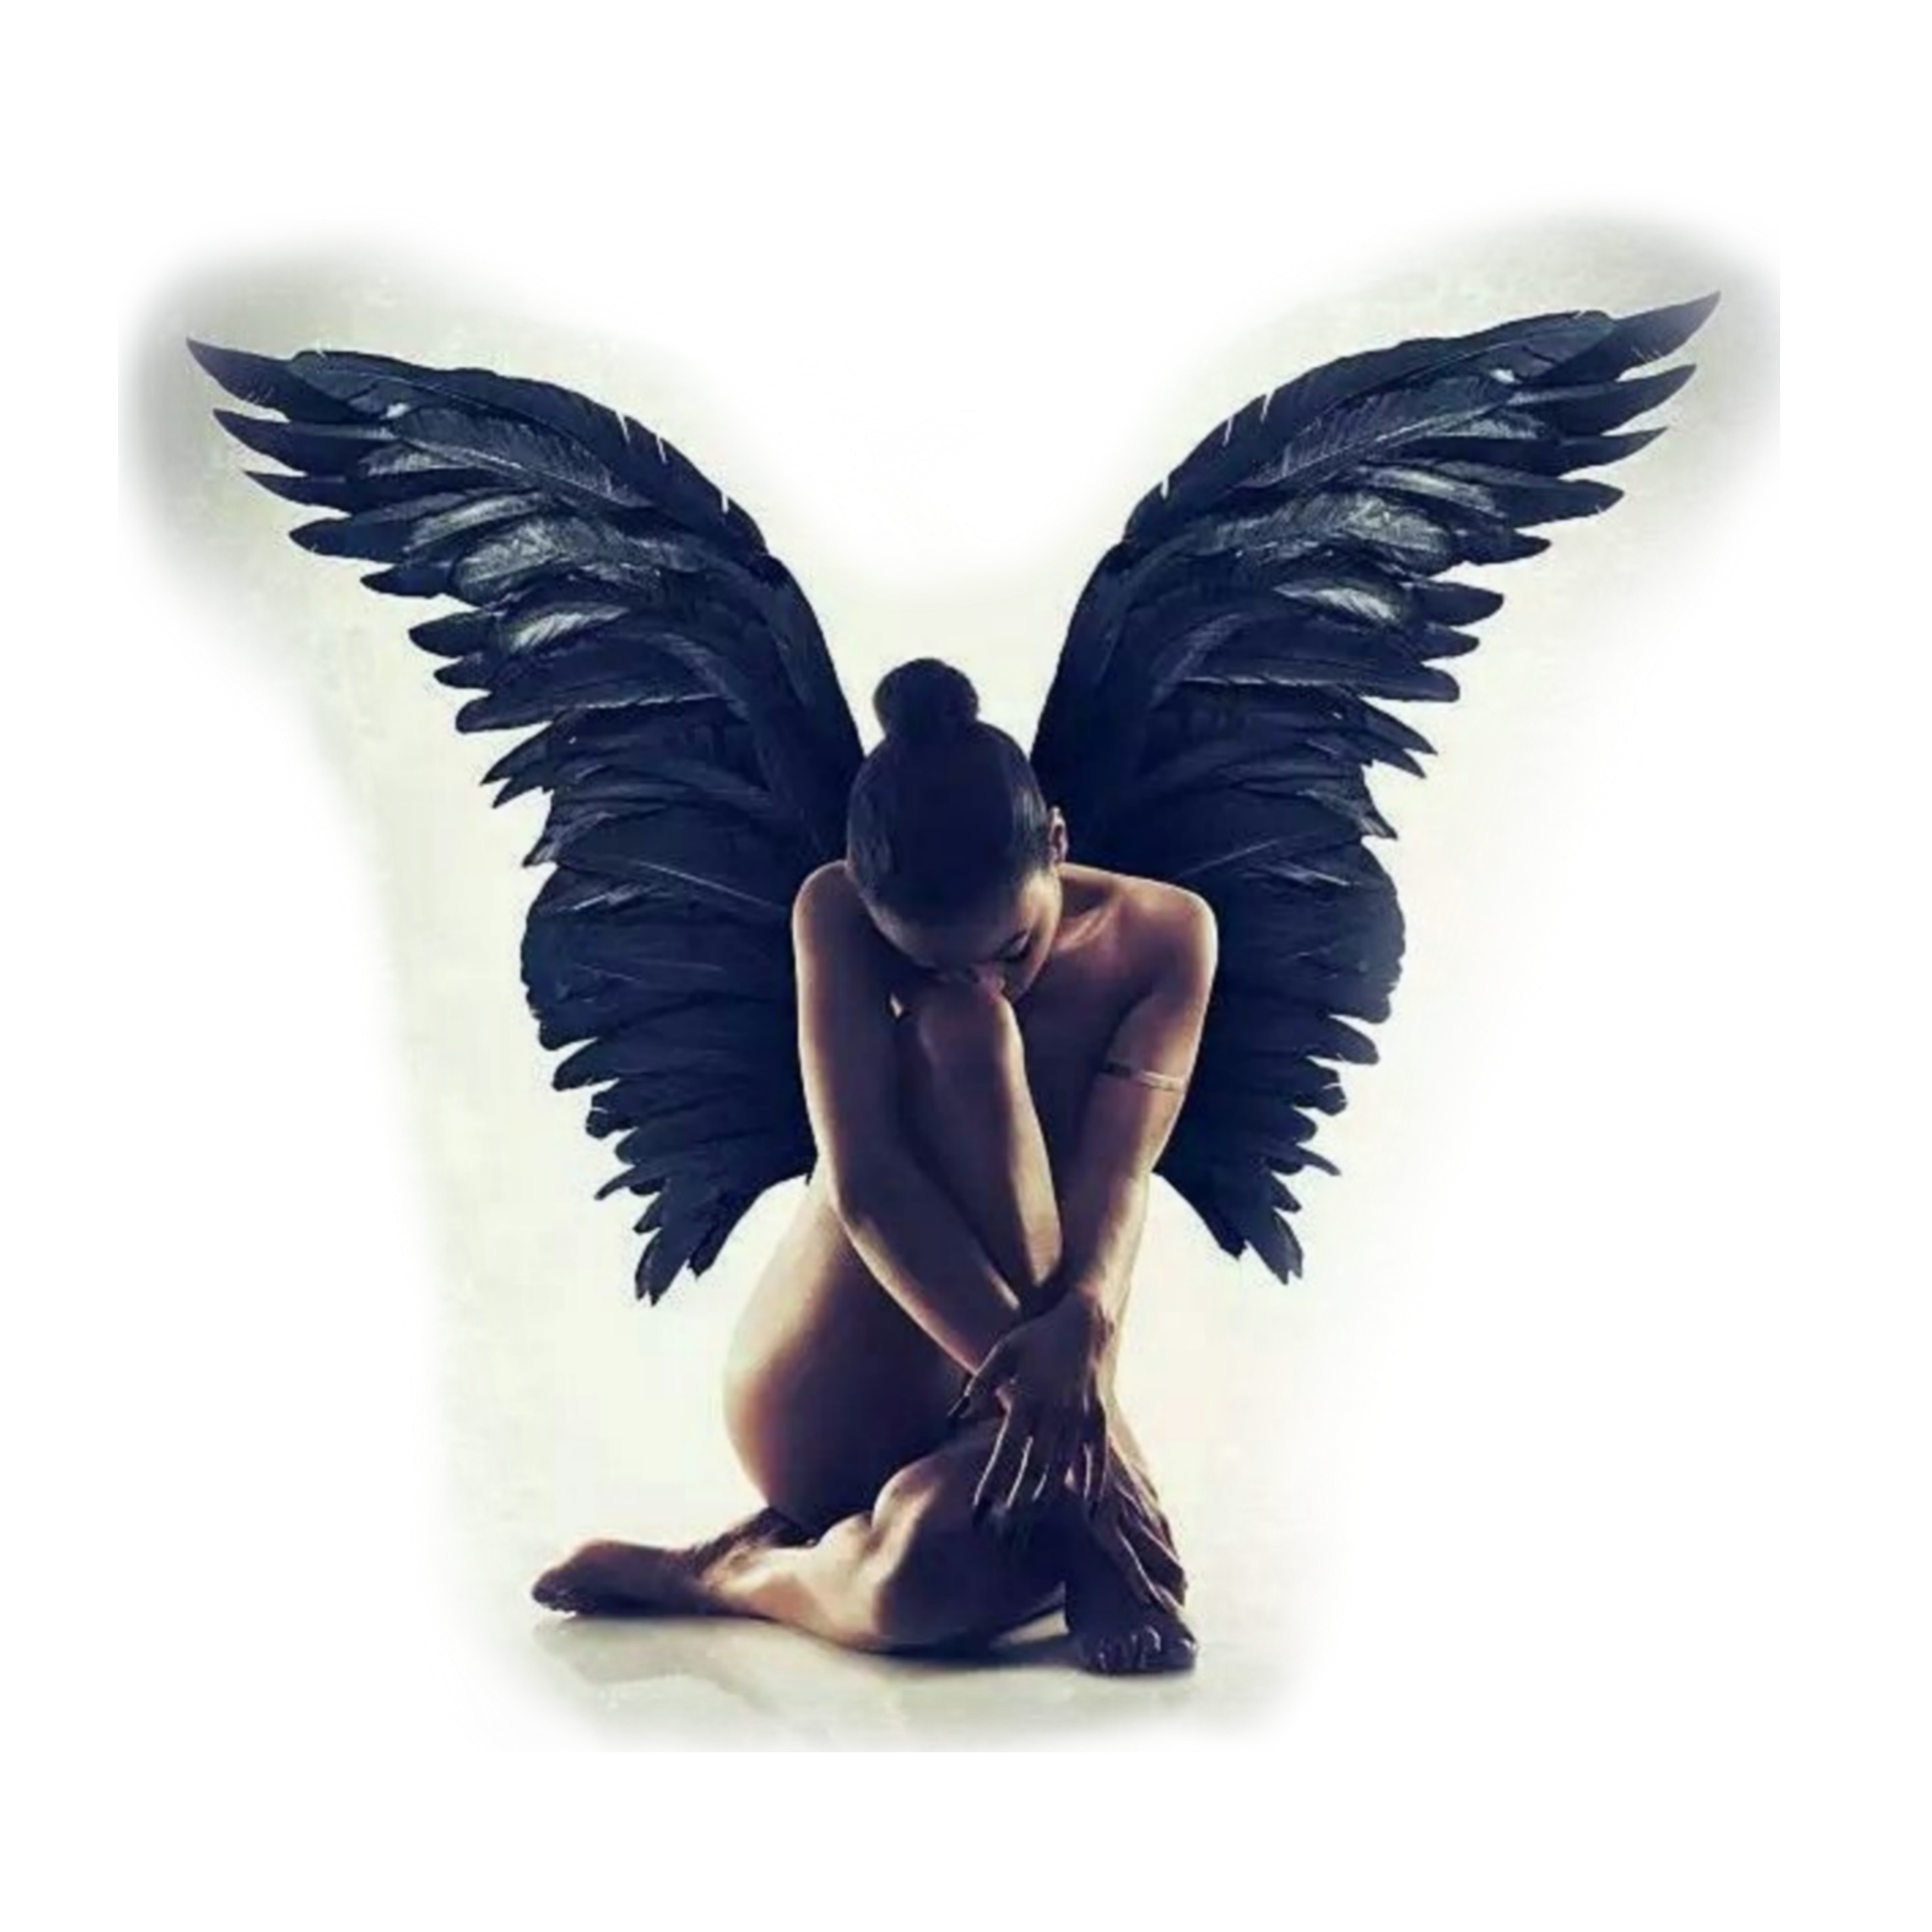 This visual is about mujersentada alasdeangel angelcaido freetoedit #mujers...